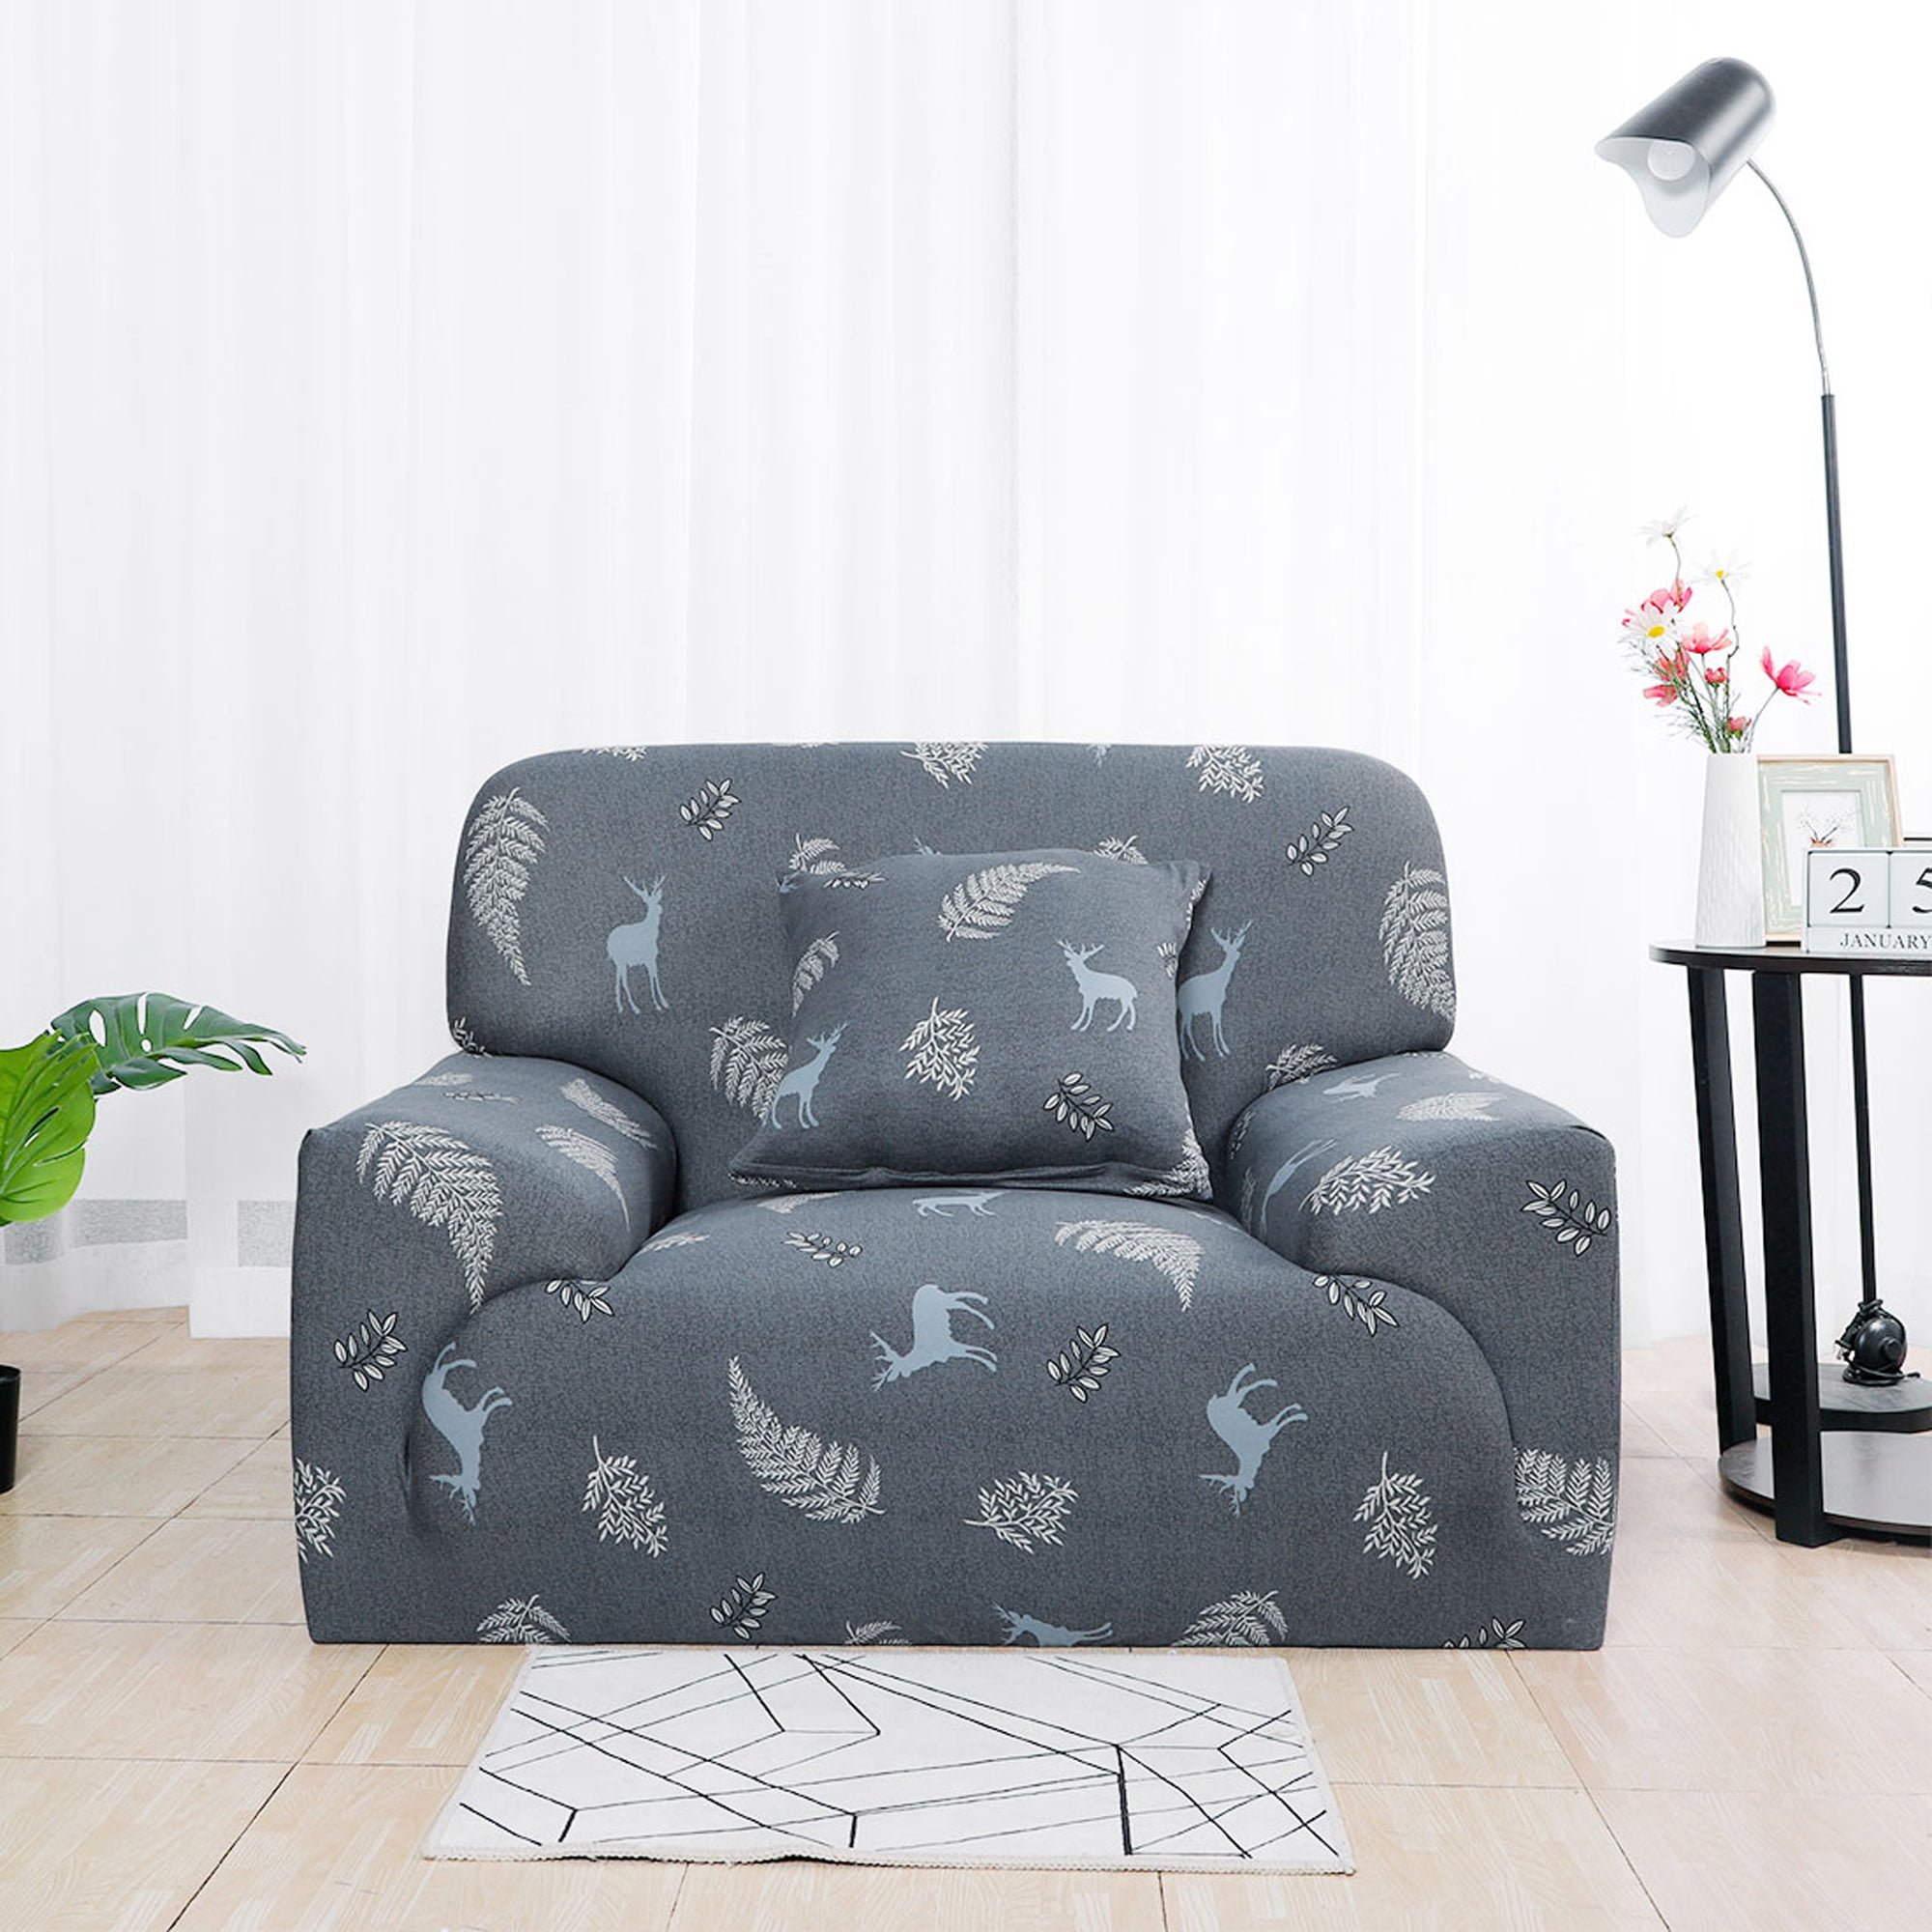 PiccoCasa Stretch Sofa Cover Printed Couch Covers Elastic Universal Sofa  Furniture Slipcovers for 1 2 3 4 Cushion Couches Gray 35-51 inches